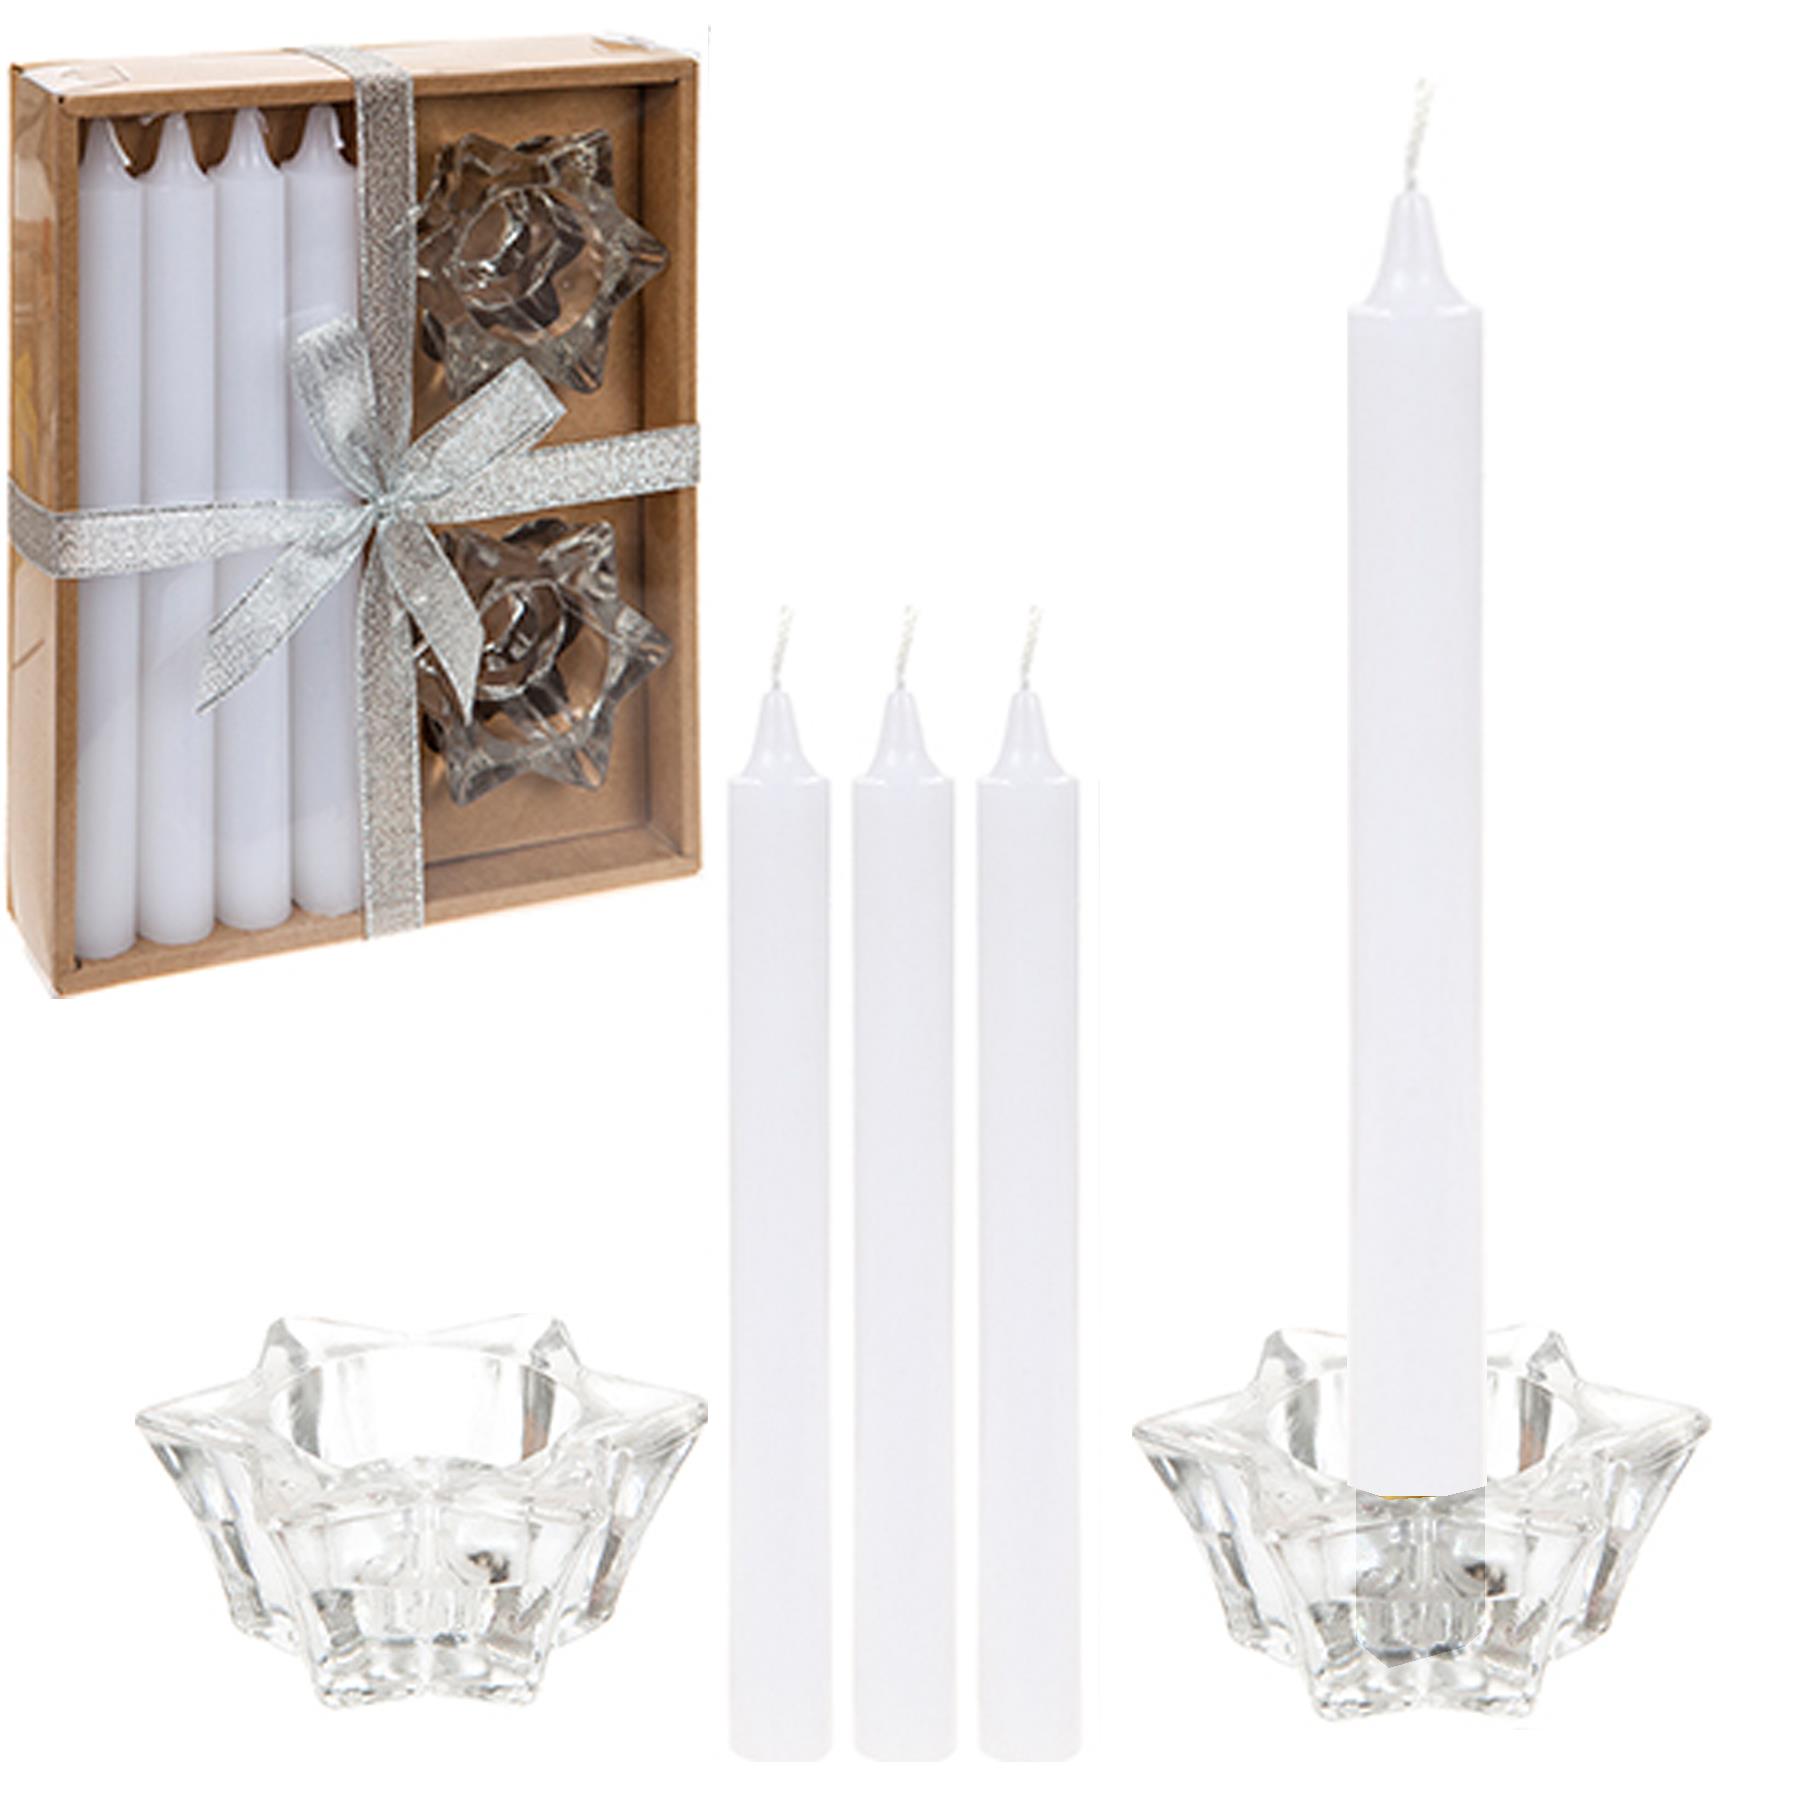 6 Piece Dinner Candle Boxed Gift Set - Christmas Table - White